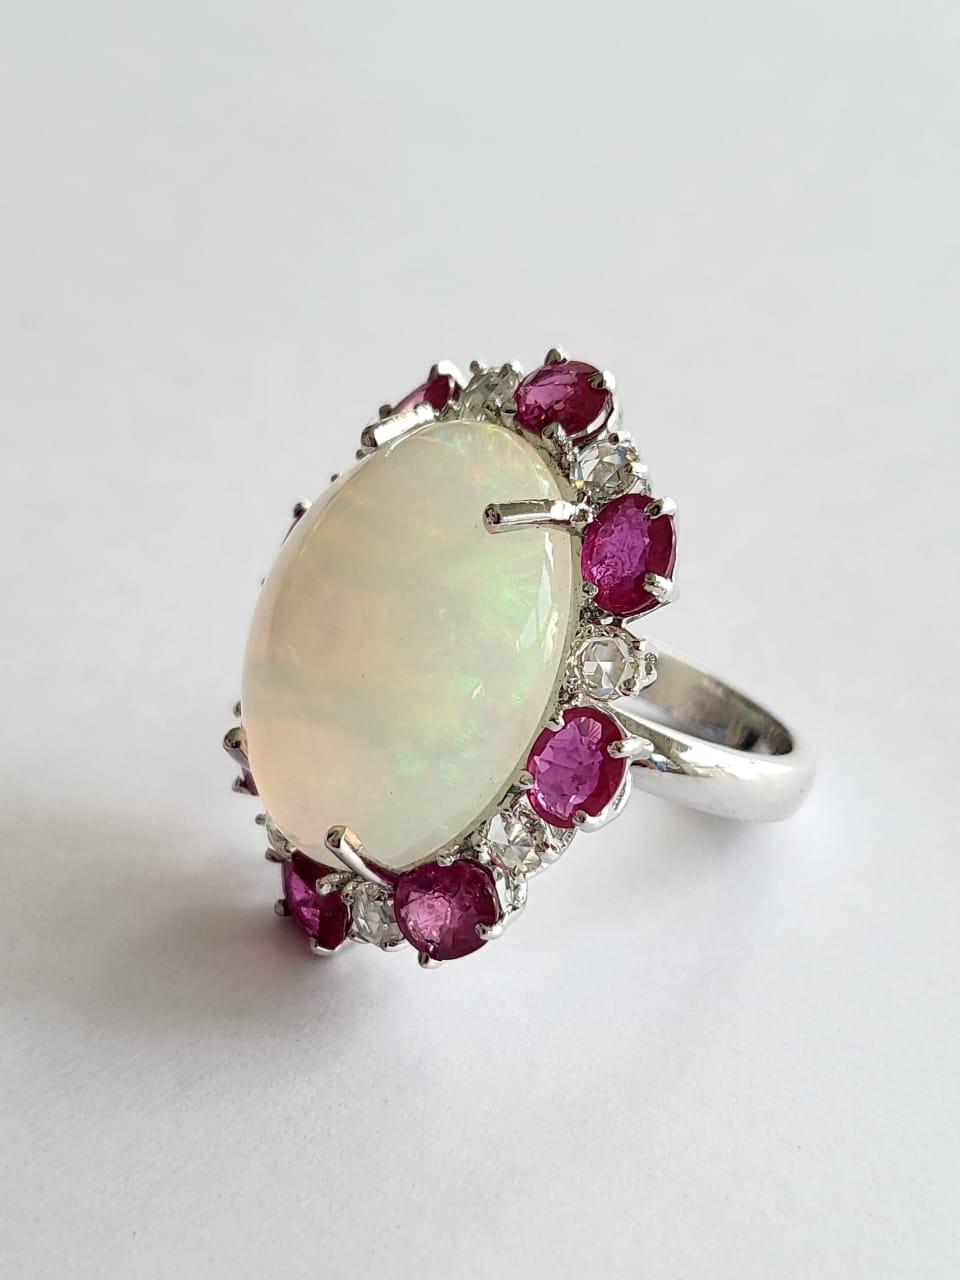 Modern Set in 18k White Gold, Ethiopian Opal, Ruby&Rose Cut Diamonds Cocktail Dome Ring